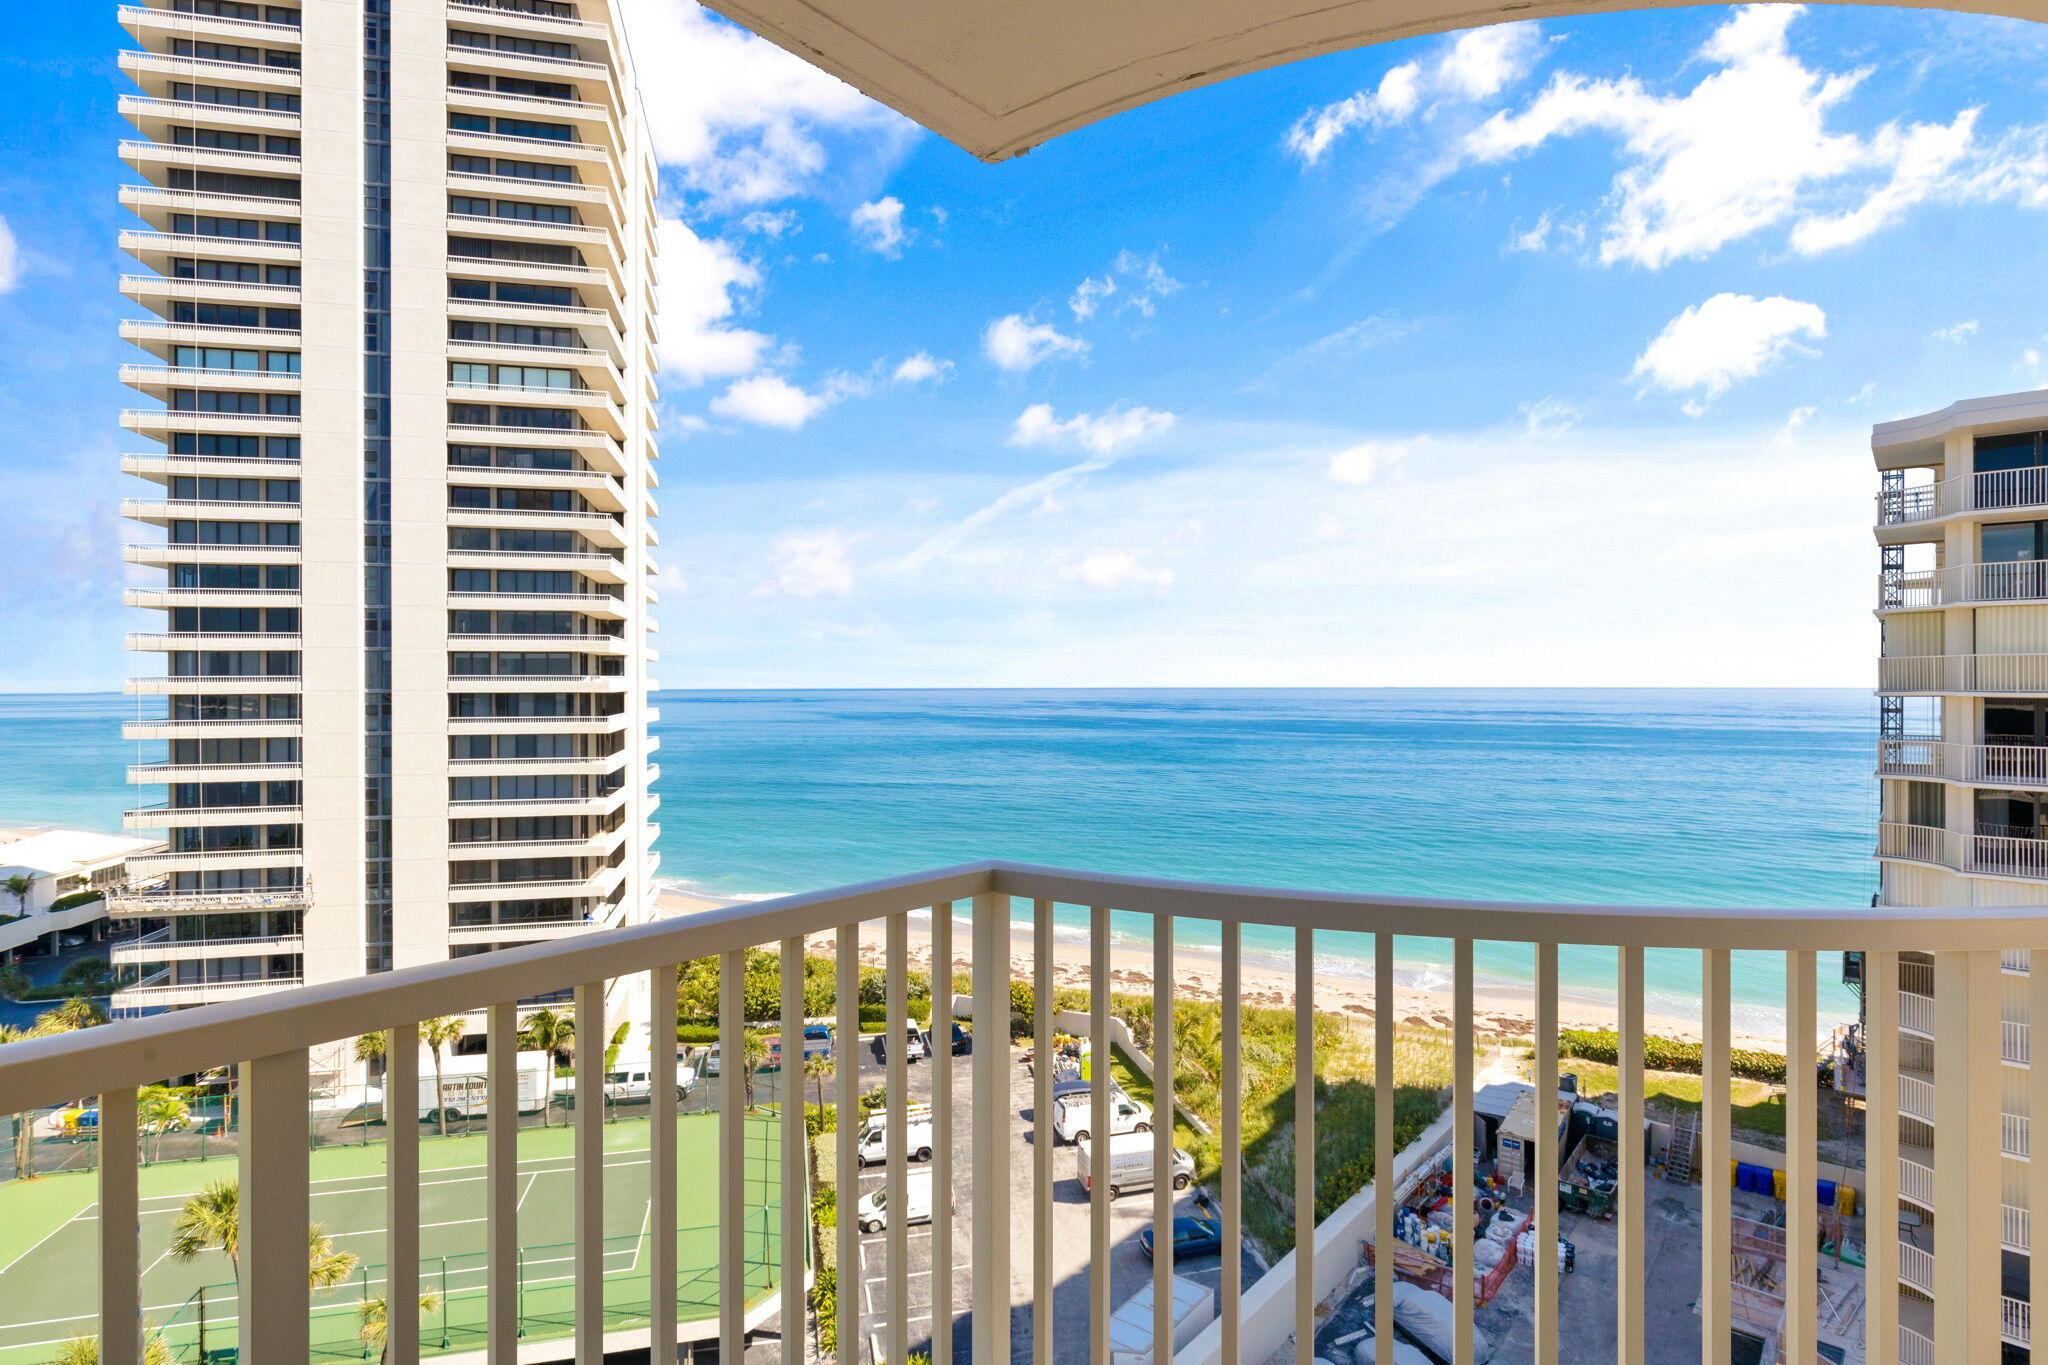 A rare opportunity to live the beachfront lifestyle! This gorgeous 2-bed NE position Penthouse is an incredible opportunity! With stunning views of ocean, panoramic views of Intracoastal, this newly renovated condo won't last long. Unit features a wraparound balcony w/breathtaking sunrise & sunsets. In addition to spectacular views, unit has many interior upgrades. Features include marble & wood flooring, modern light fixtures, quartz countertops, marble dry bar w/wine cooler, storage & cabinetry. Main bedroom features intracoastal views, custom walk-in closet, dual sinks & custom bathtub w/glass doors. Second bedroom has many modern updates & walk-in glass shower.  There are many furnishings & other amenities included in the sale. Community offers a pool, fitness center & extra storage!